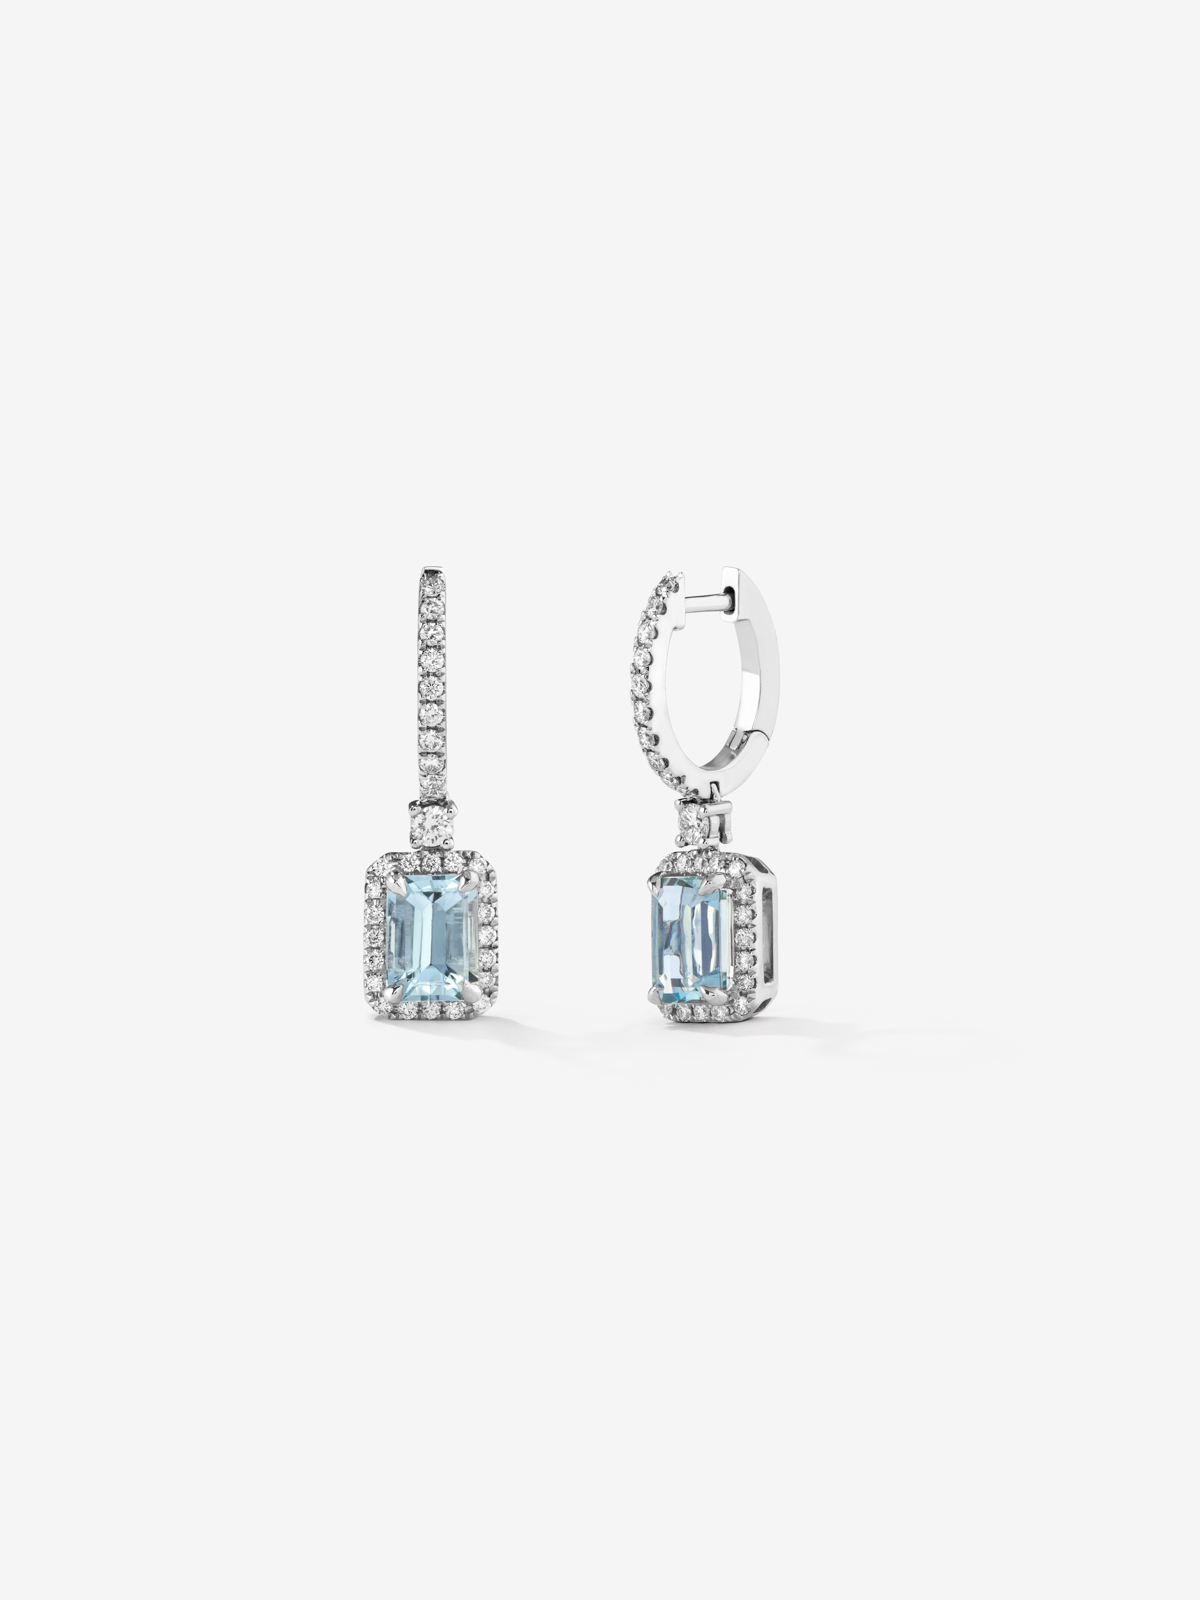 Hoop earrings with 18K white gold pendant with aquamarine and diamond.